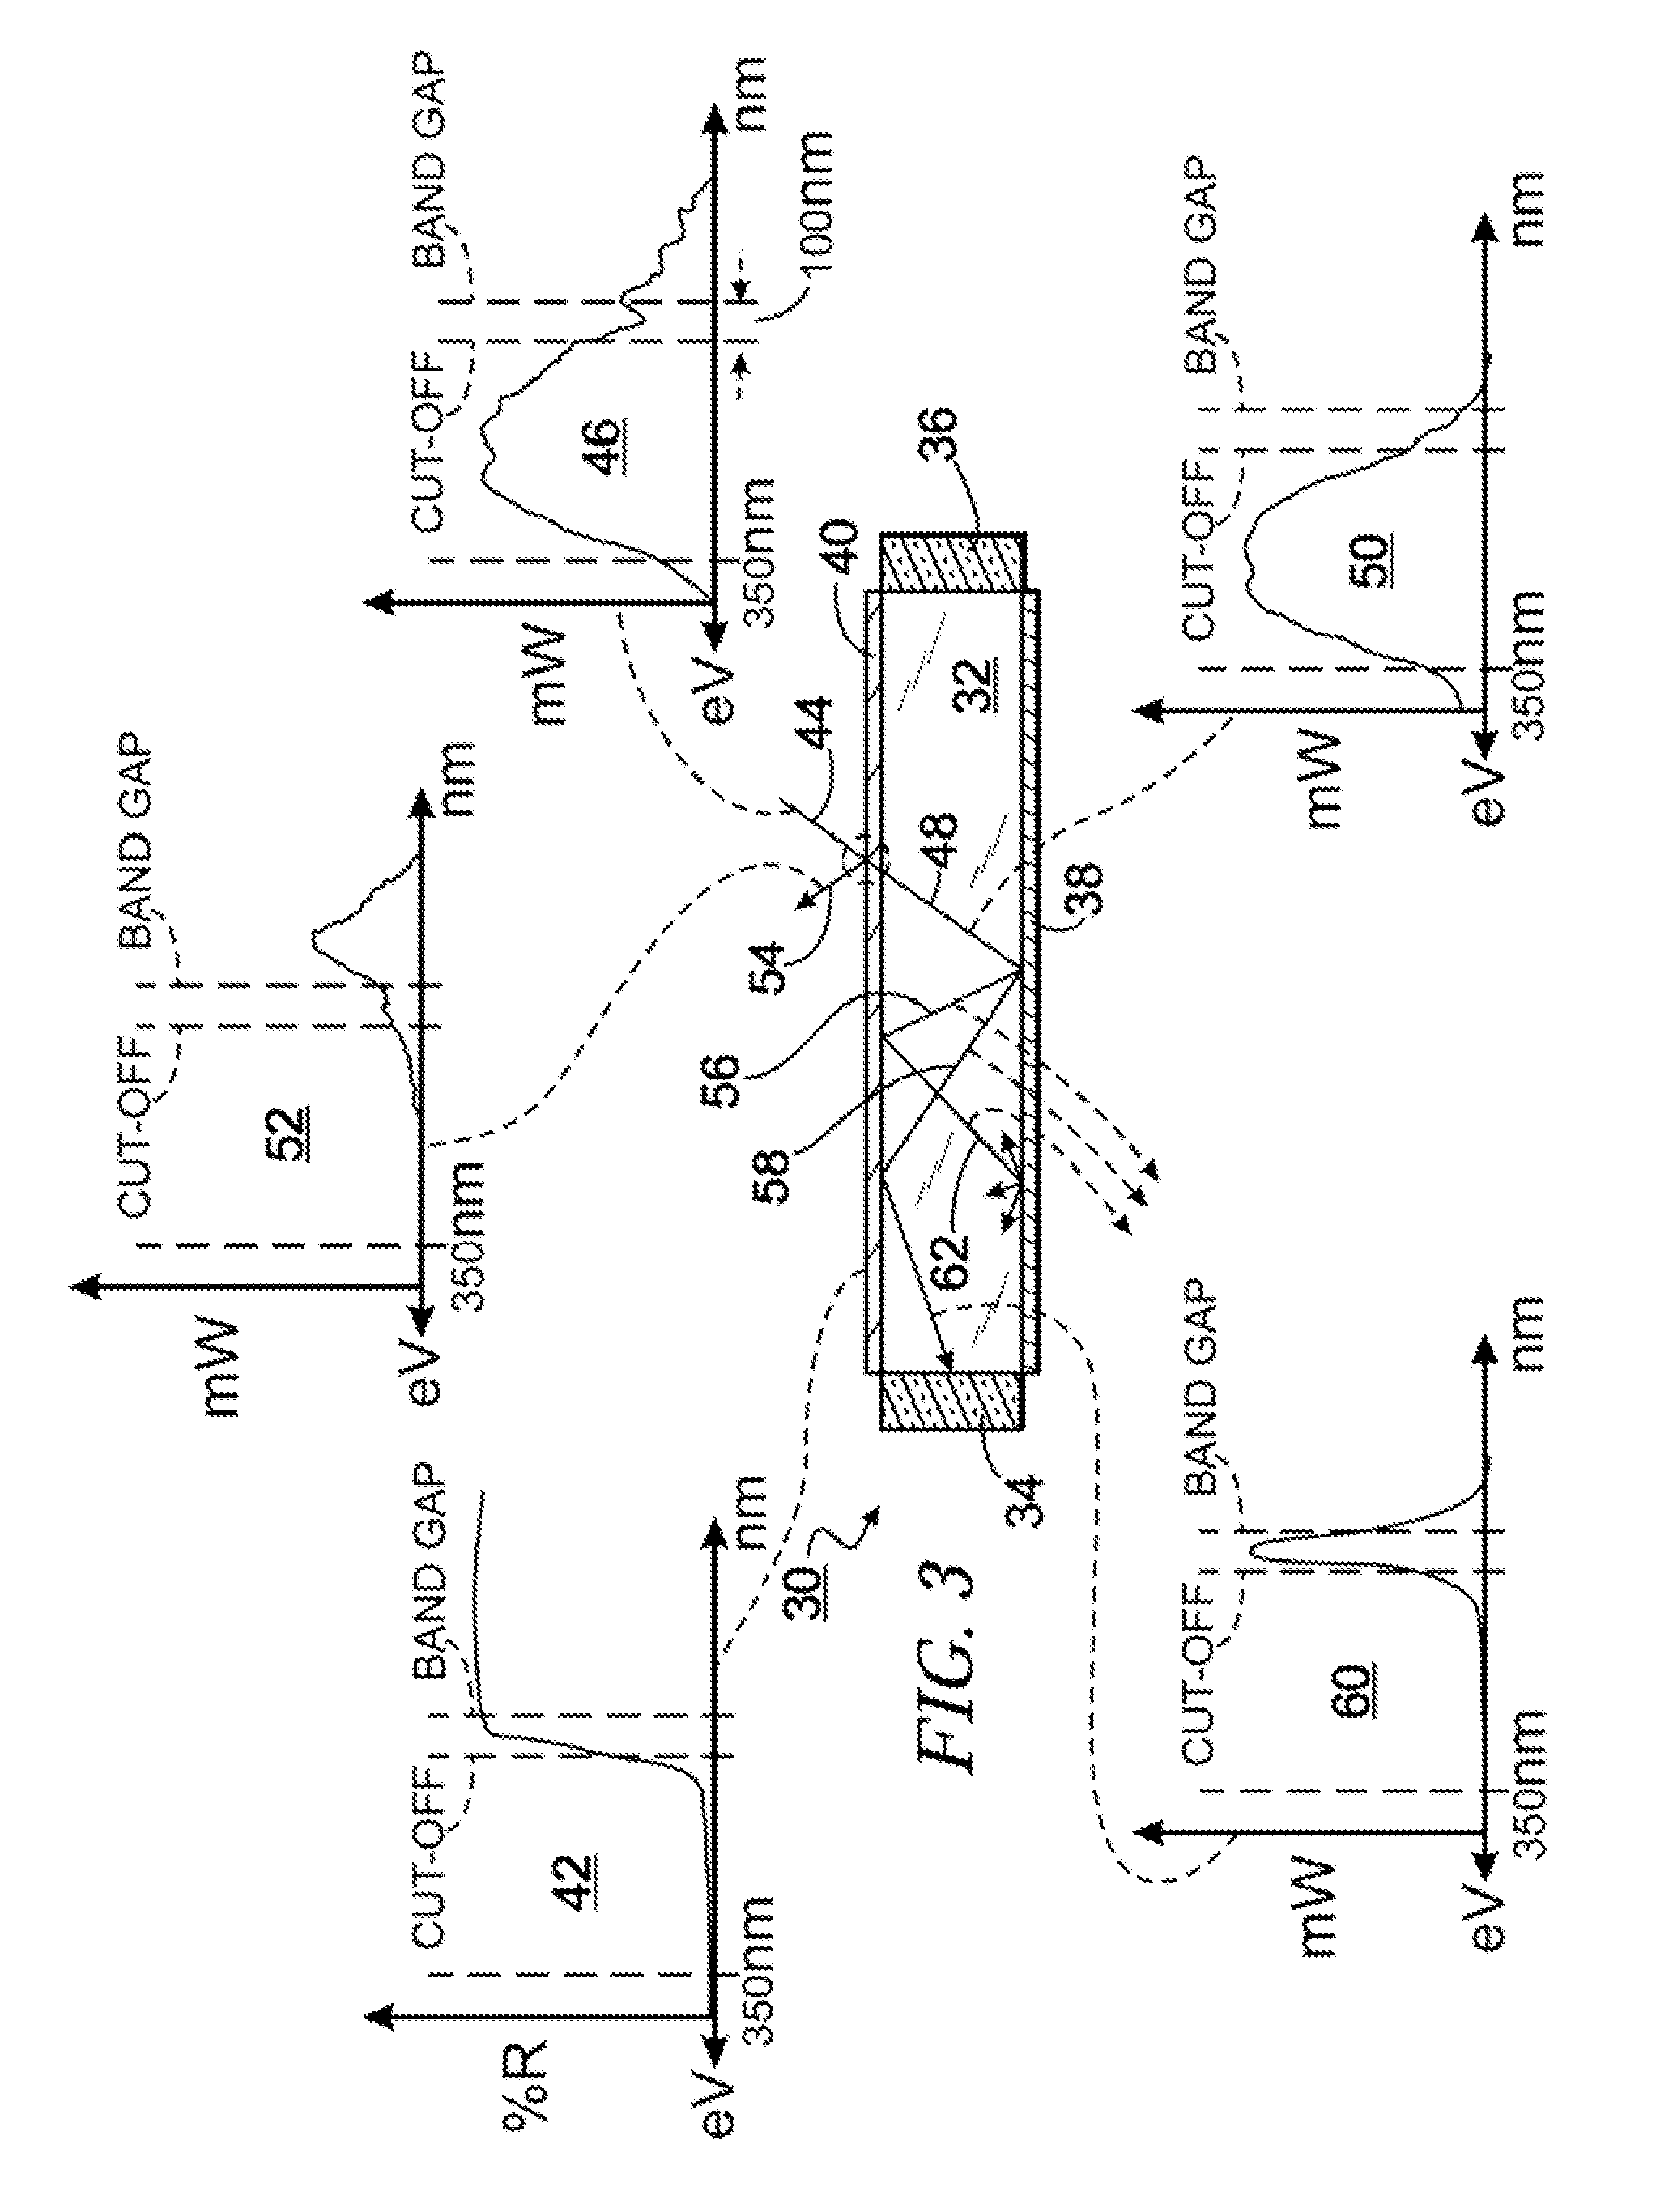 Photovoltaic Conversion Assembly with Concentrating Optics